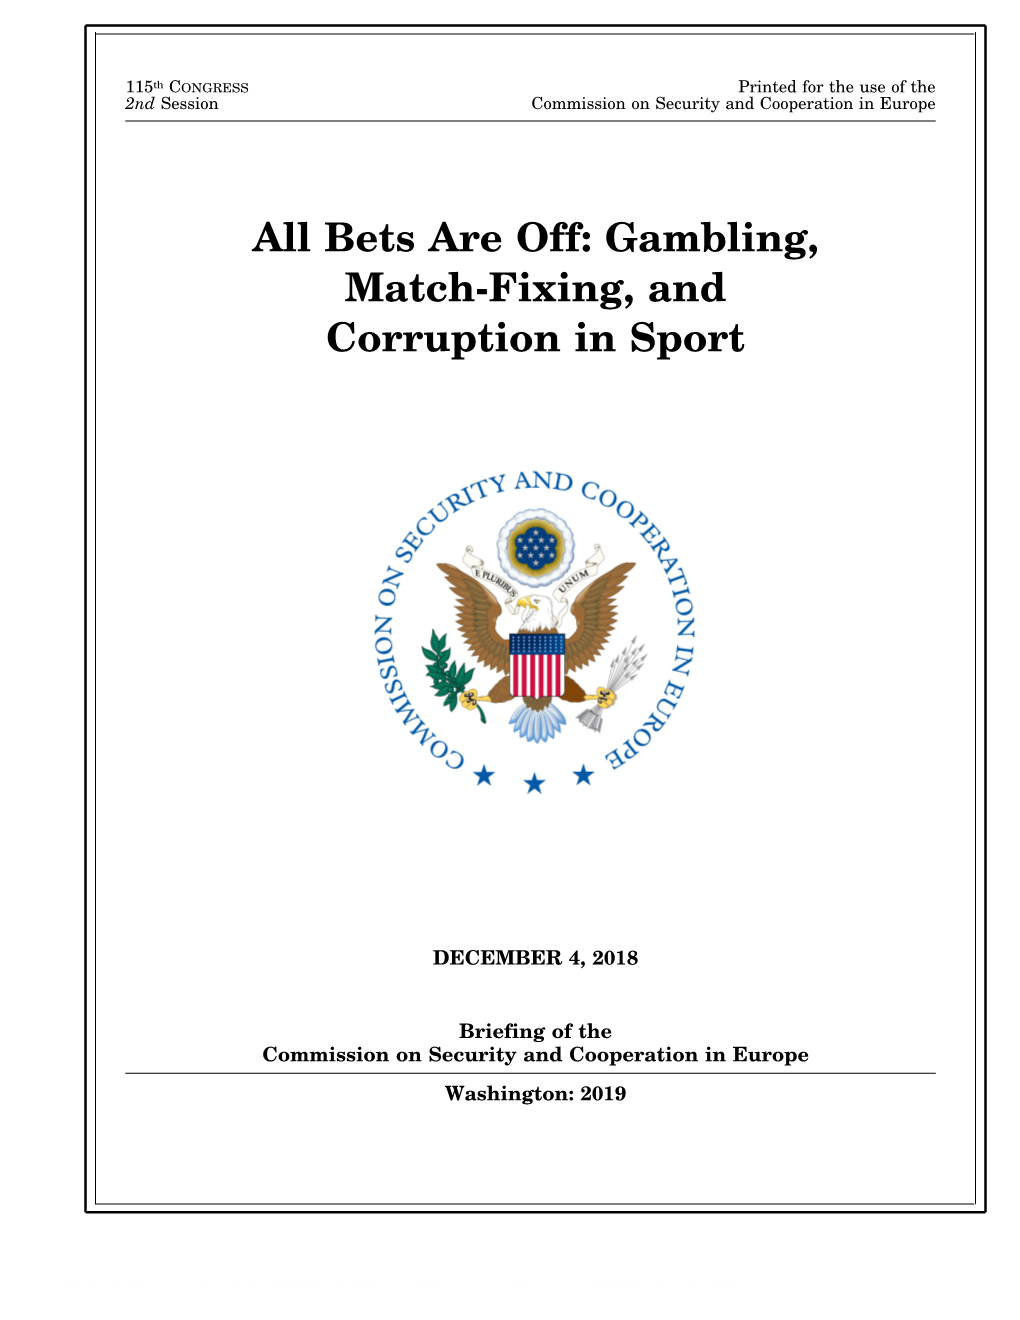 All Bets Are Off: Gambling, Match-Fixing, and Corruption in Sport